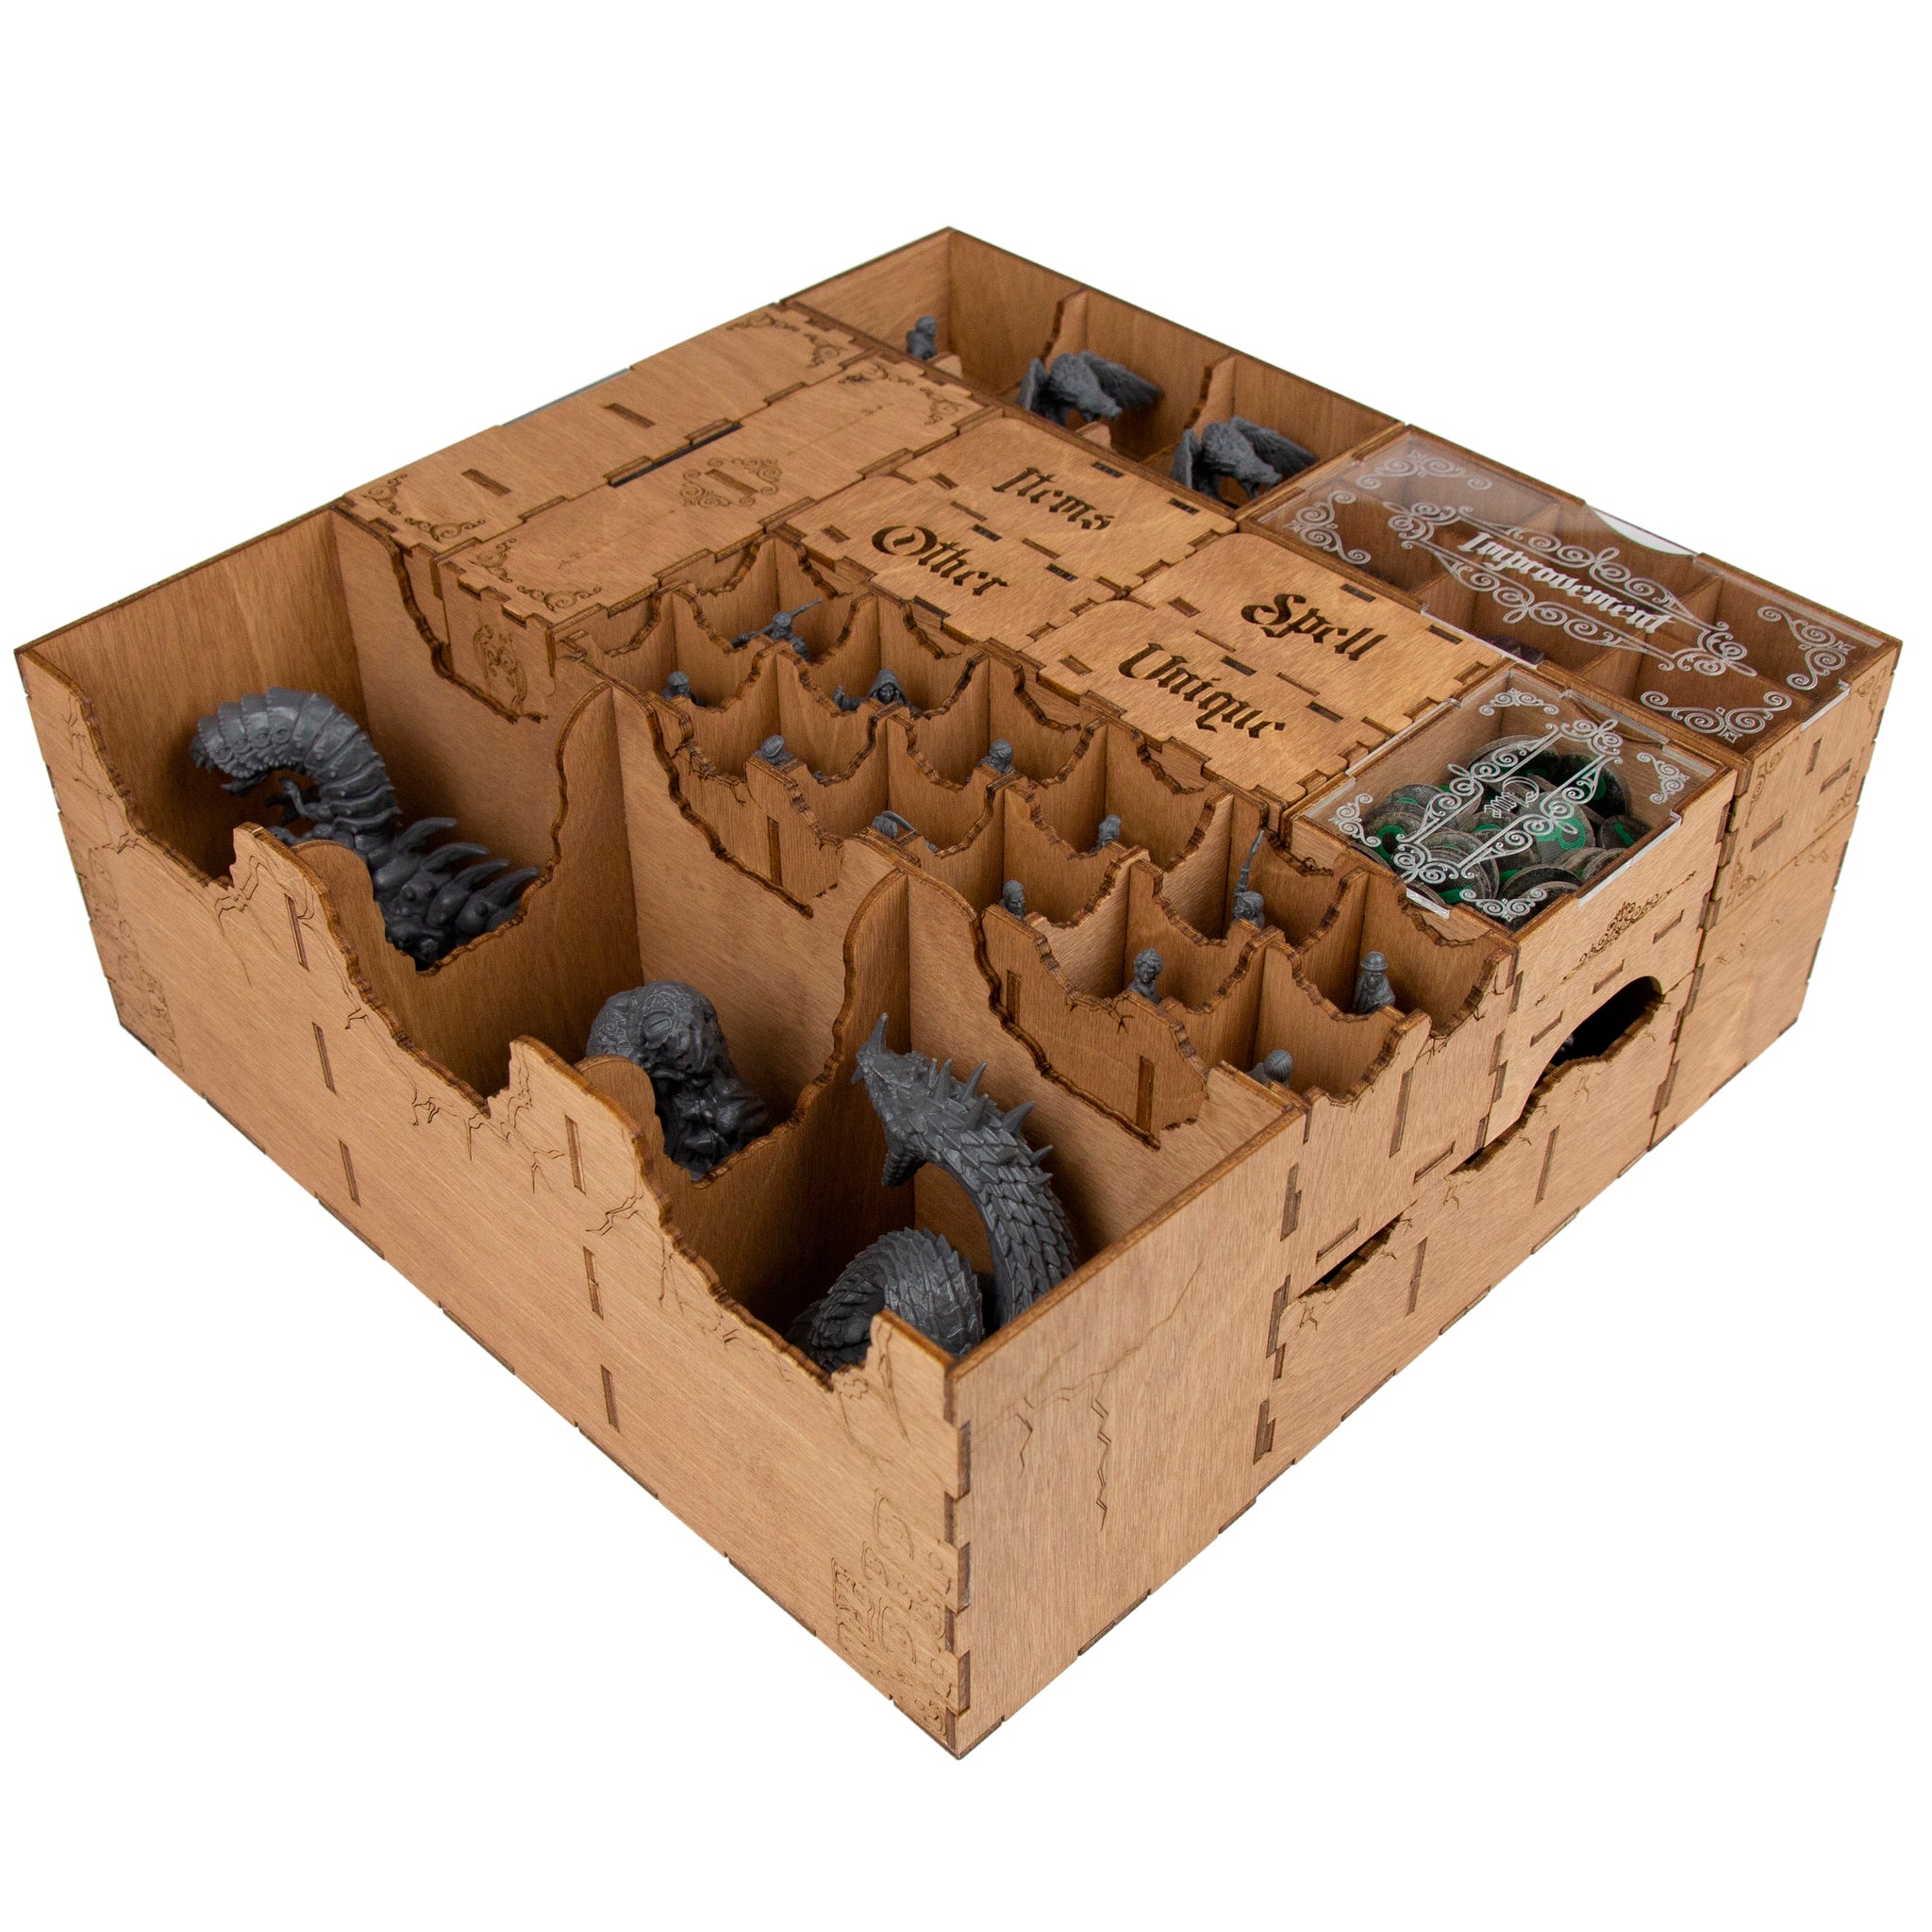 Mansions of Madness Expansions Box Made of Wood